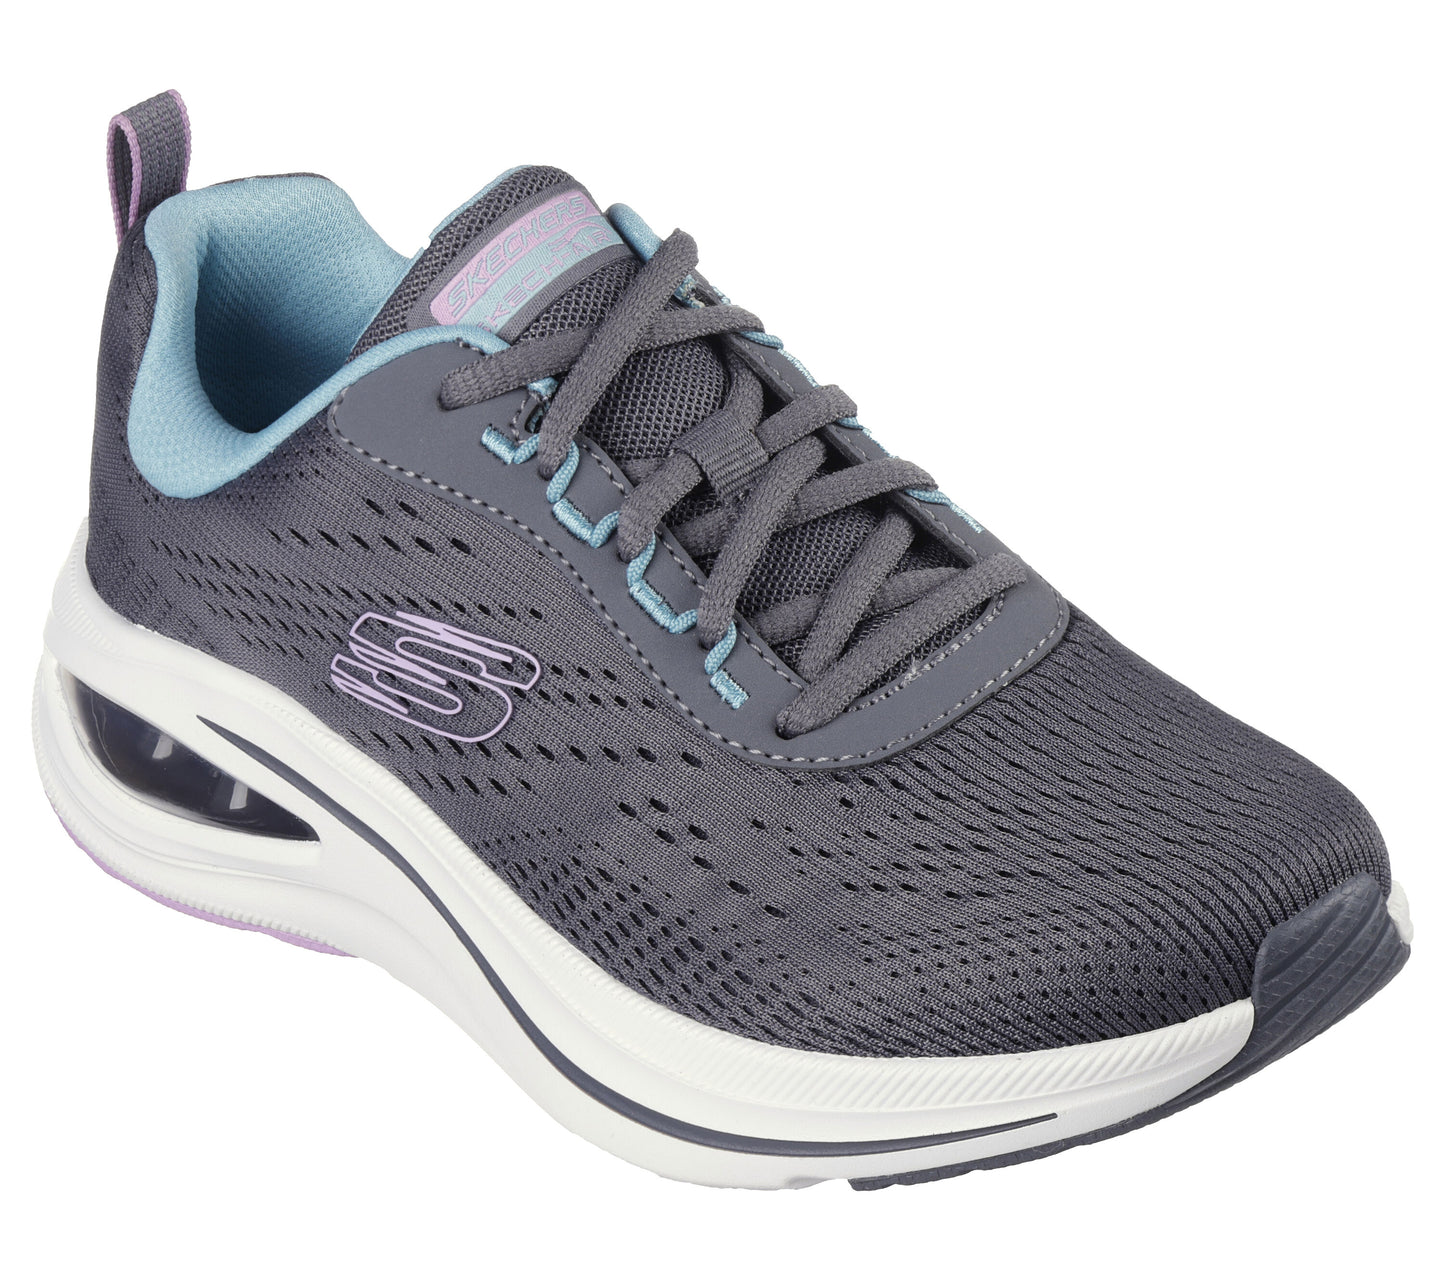 Skechers Women's 150131 Skech-Air Meta - Aired Out Trainers Charcoal Multi